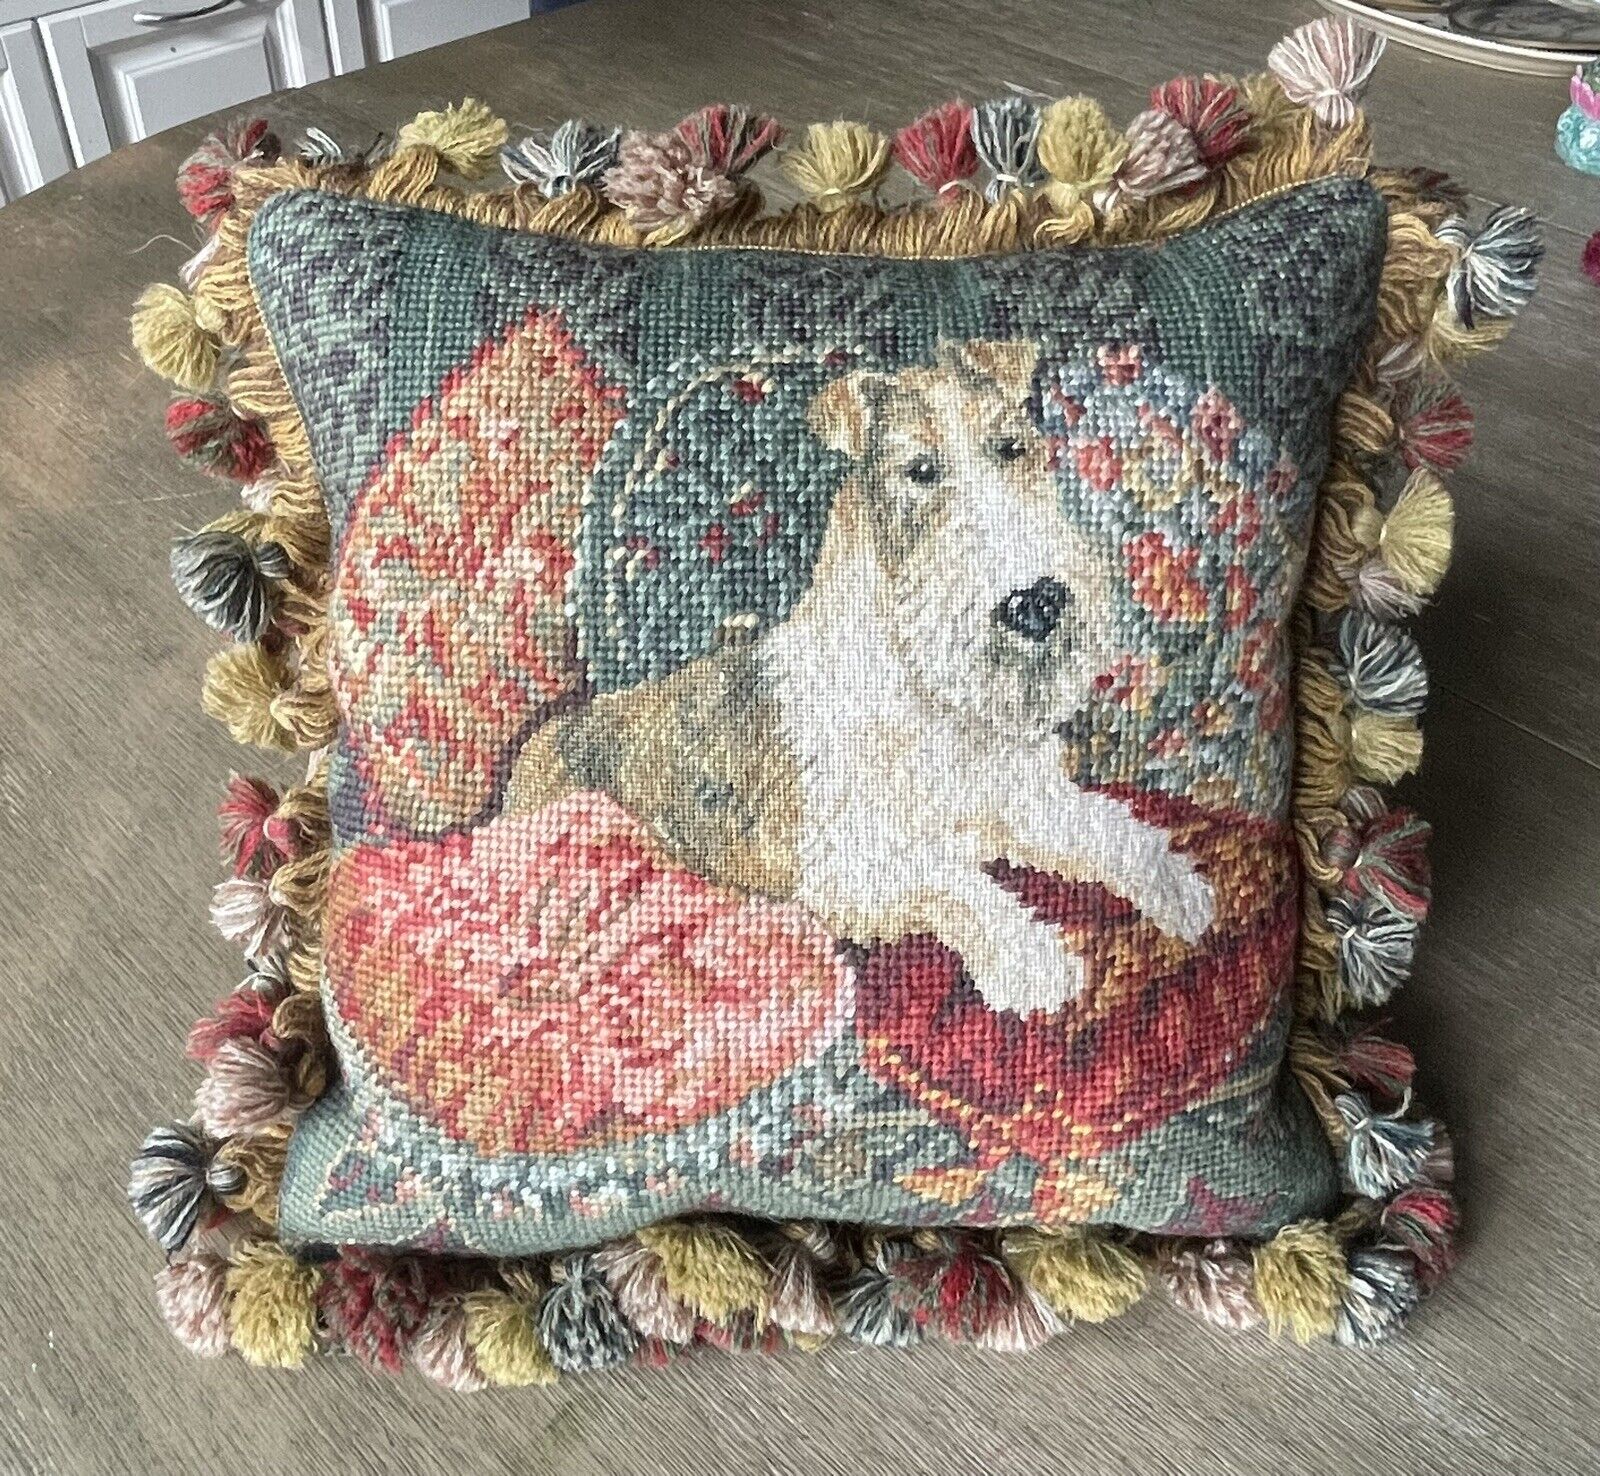 Vintage Chelsea Textiles Embroidered Pillow